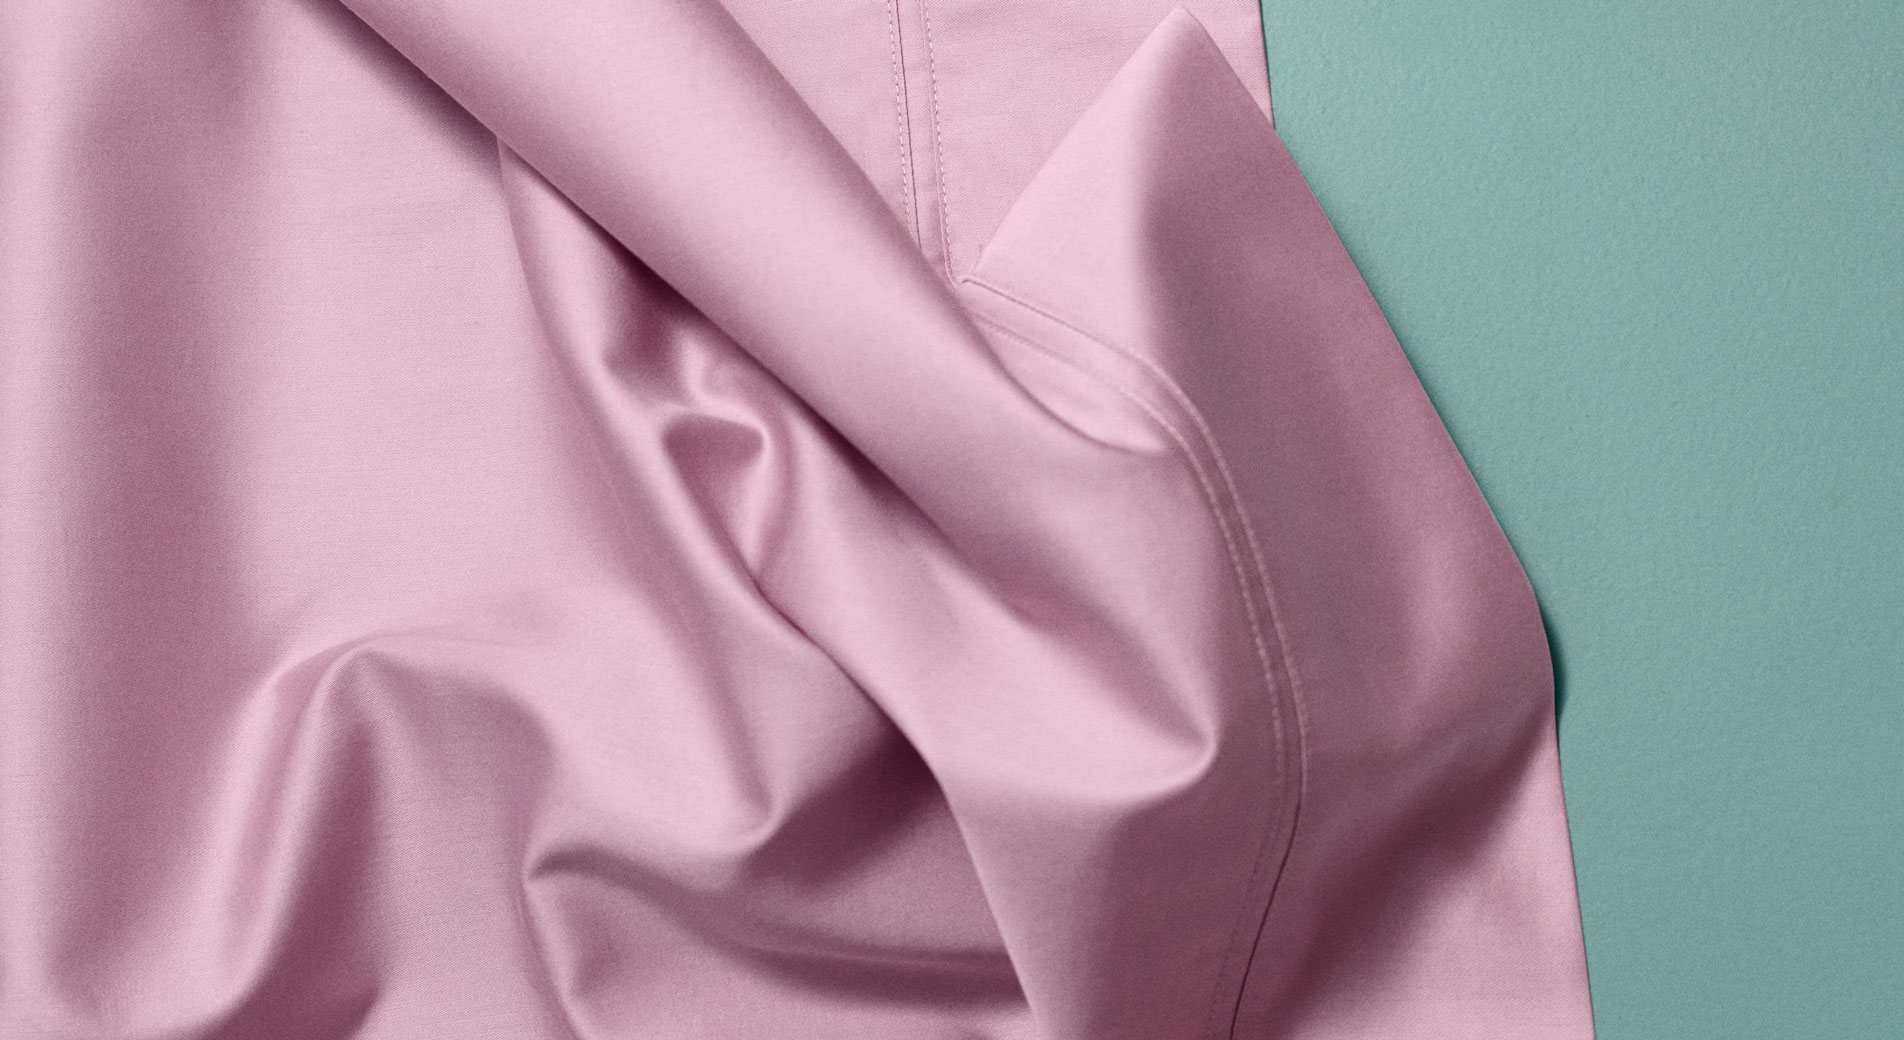 A close-up of a pale pink sateen sheet lying tousled on a teal backdrop